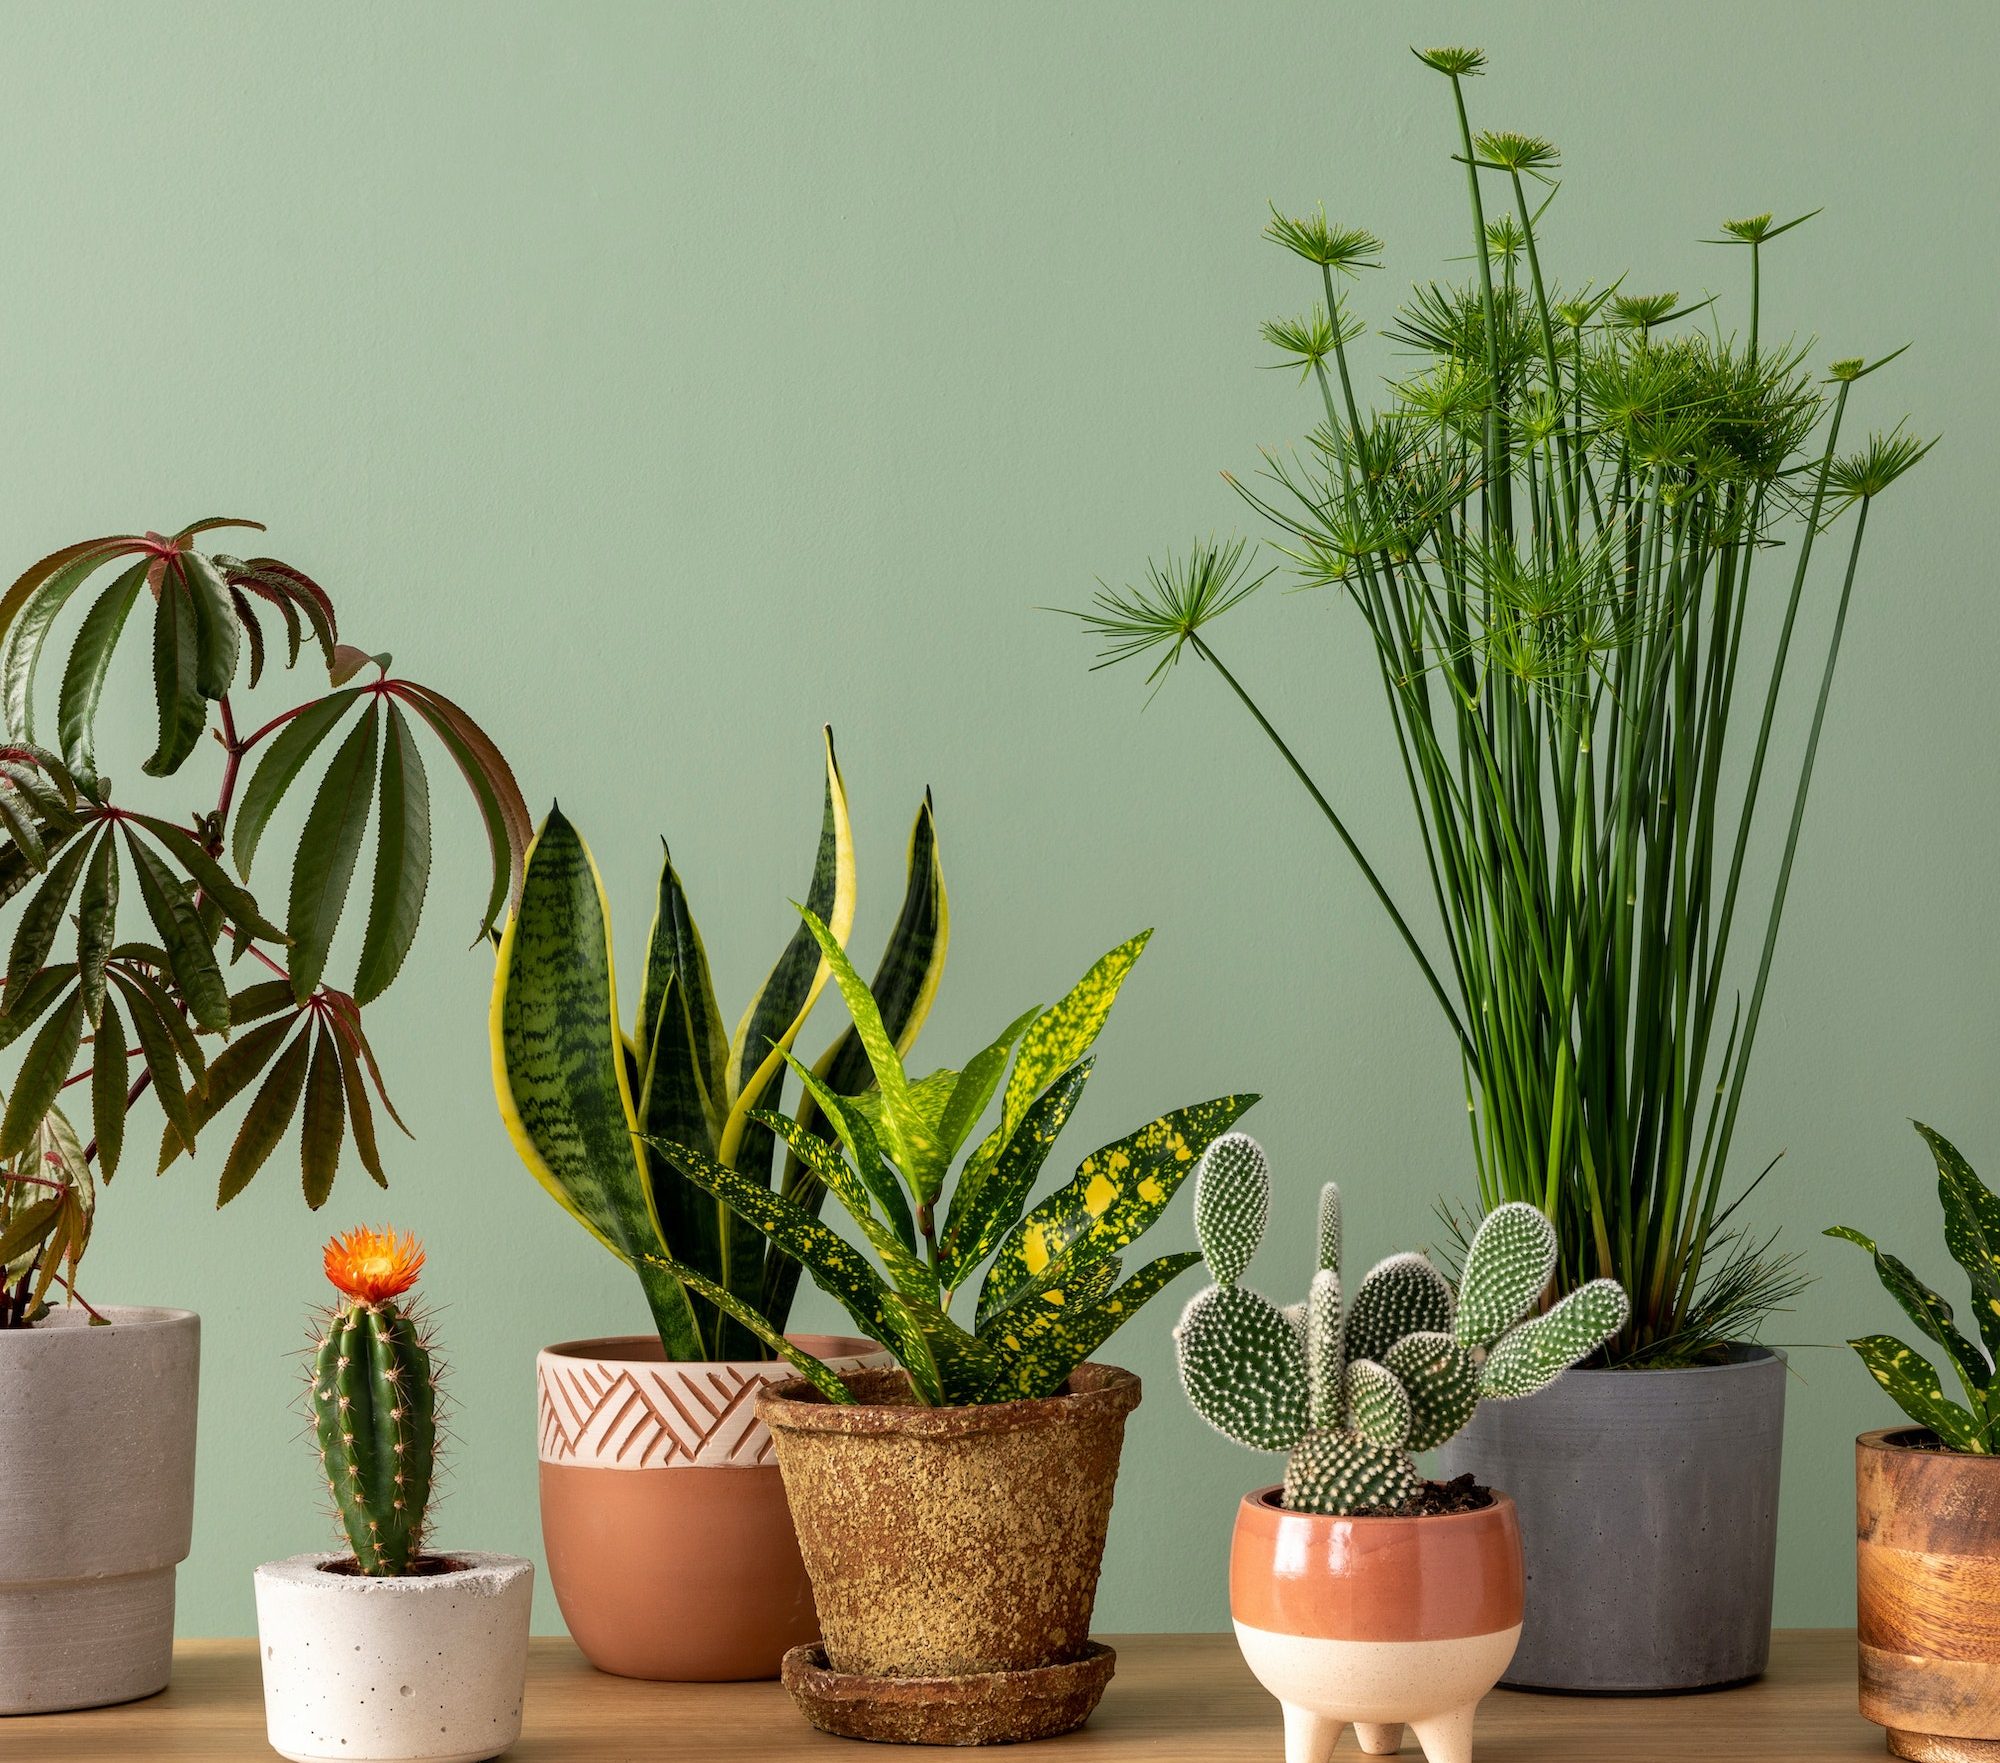 Creative composition of botanic home interior design with lots of plants in classic designed pots